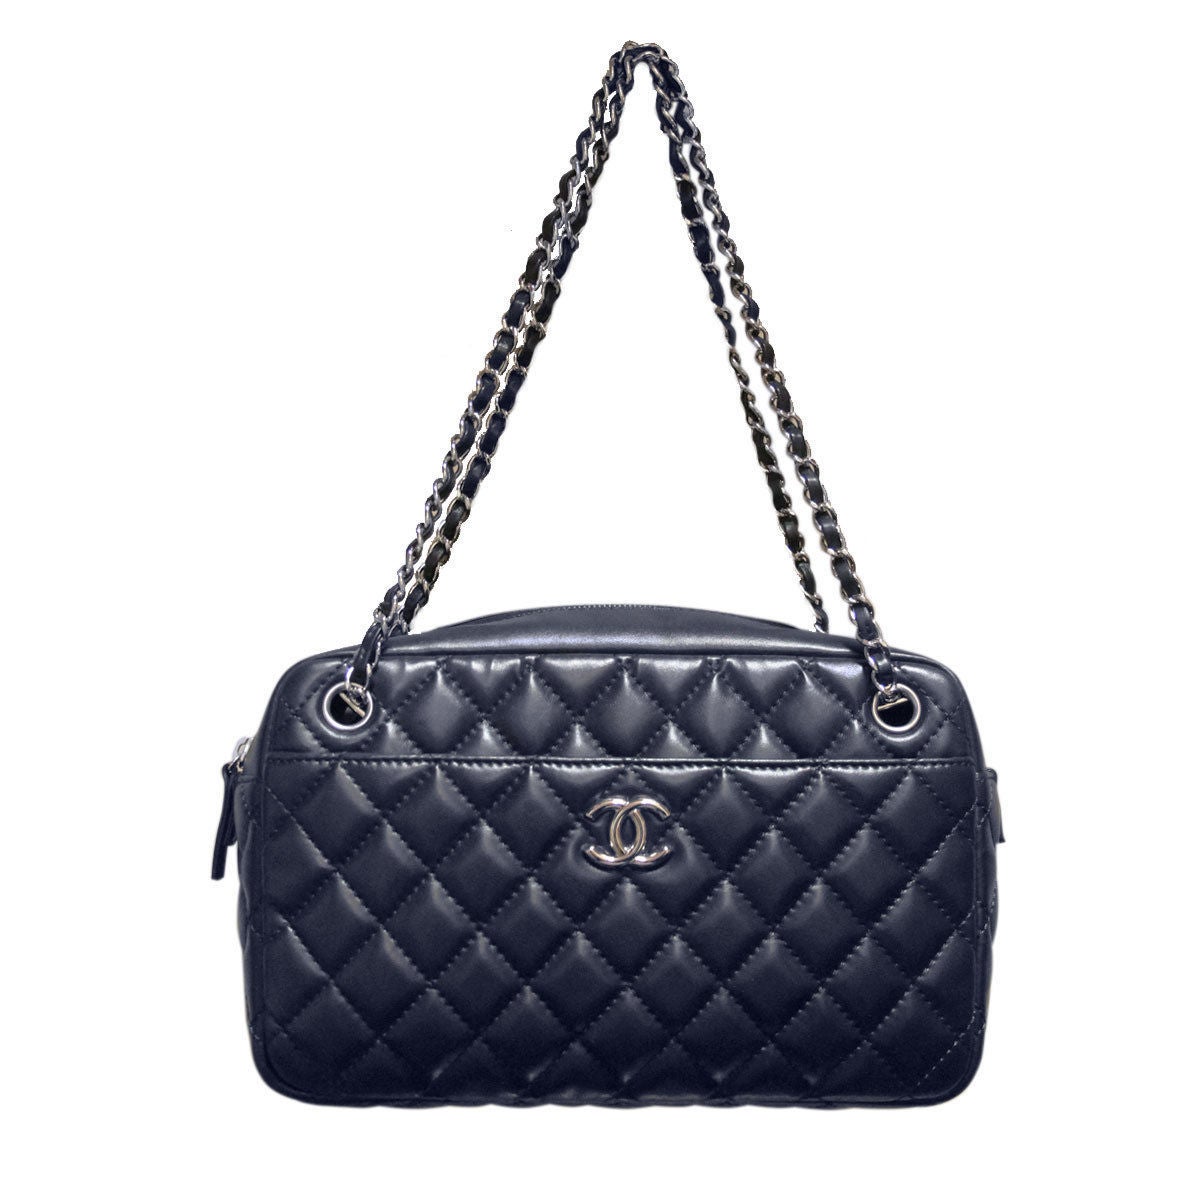 Brand: Chanel
Style: Camera Bag
Handles: Navy Lambskin Leather Braided in Silver Tone Hardware Chain
Measurements: 12